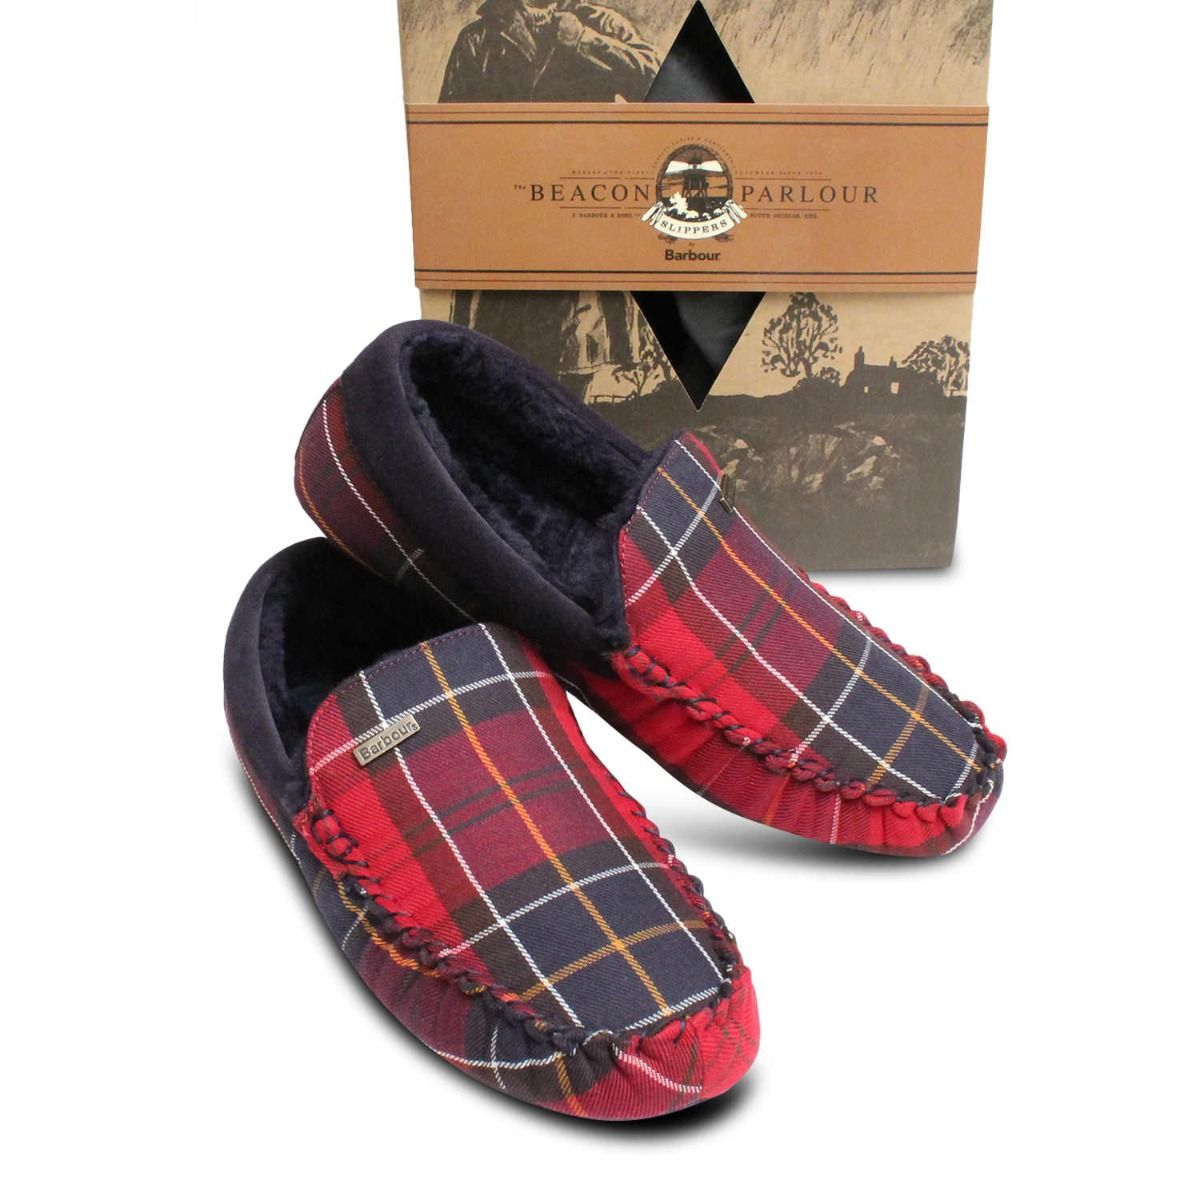 barbour slippers size 9